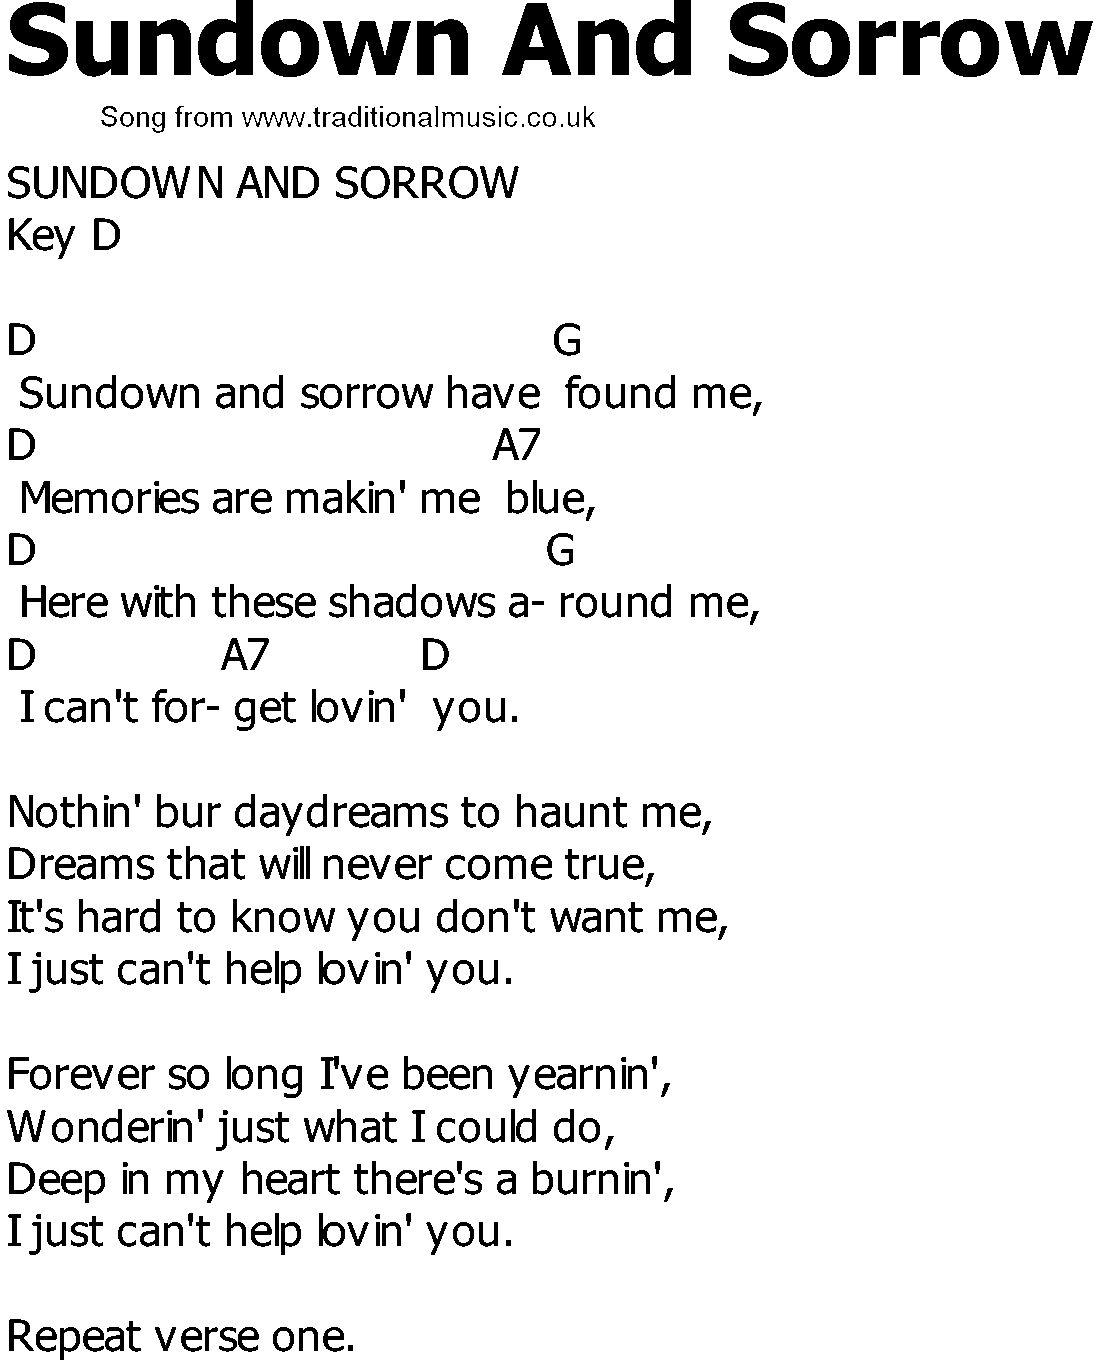 Old Country song lyrics with chords - Sundown And Sorrow